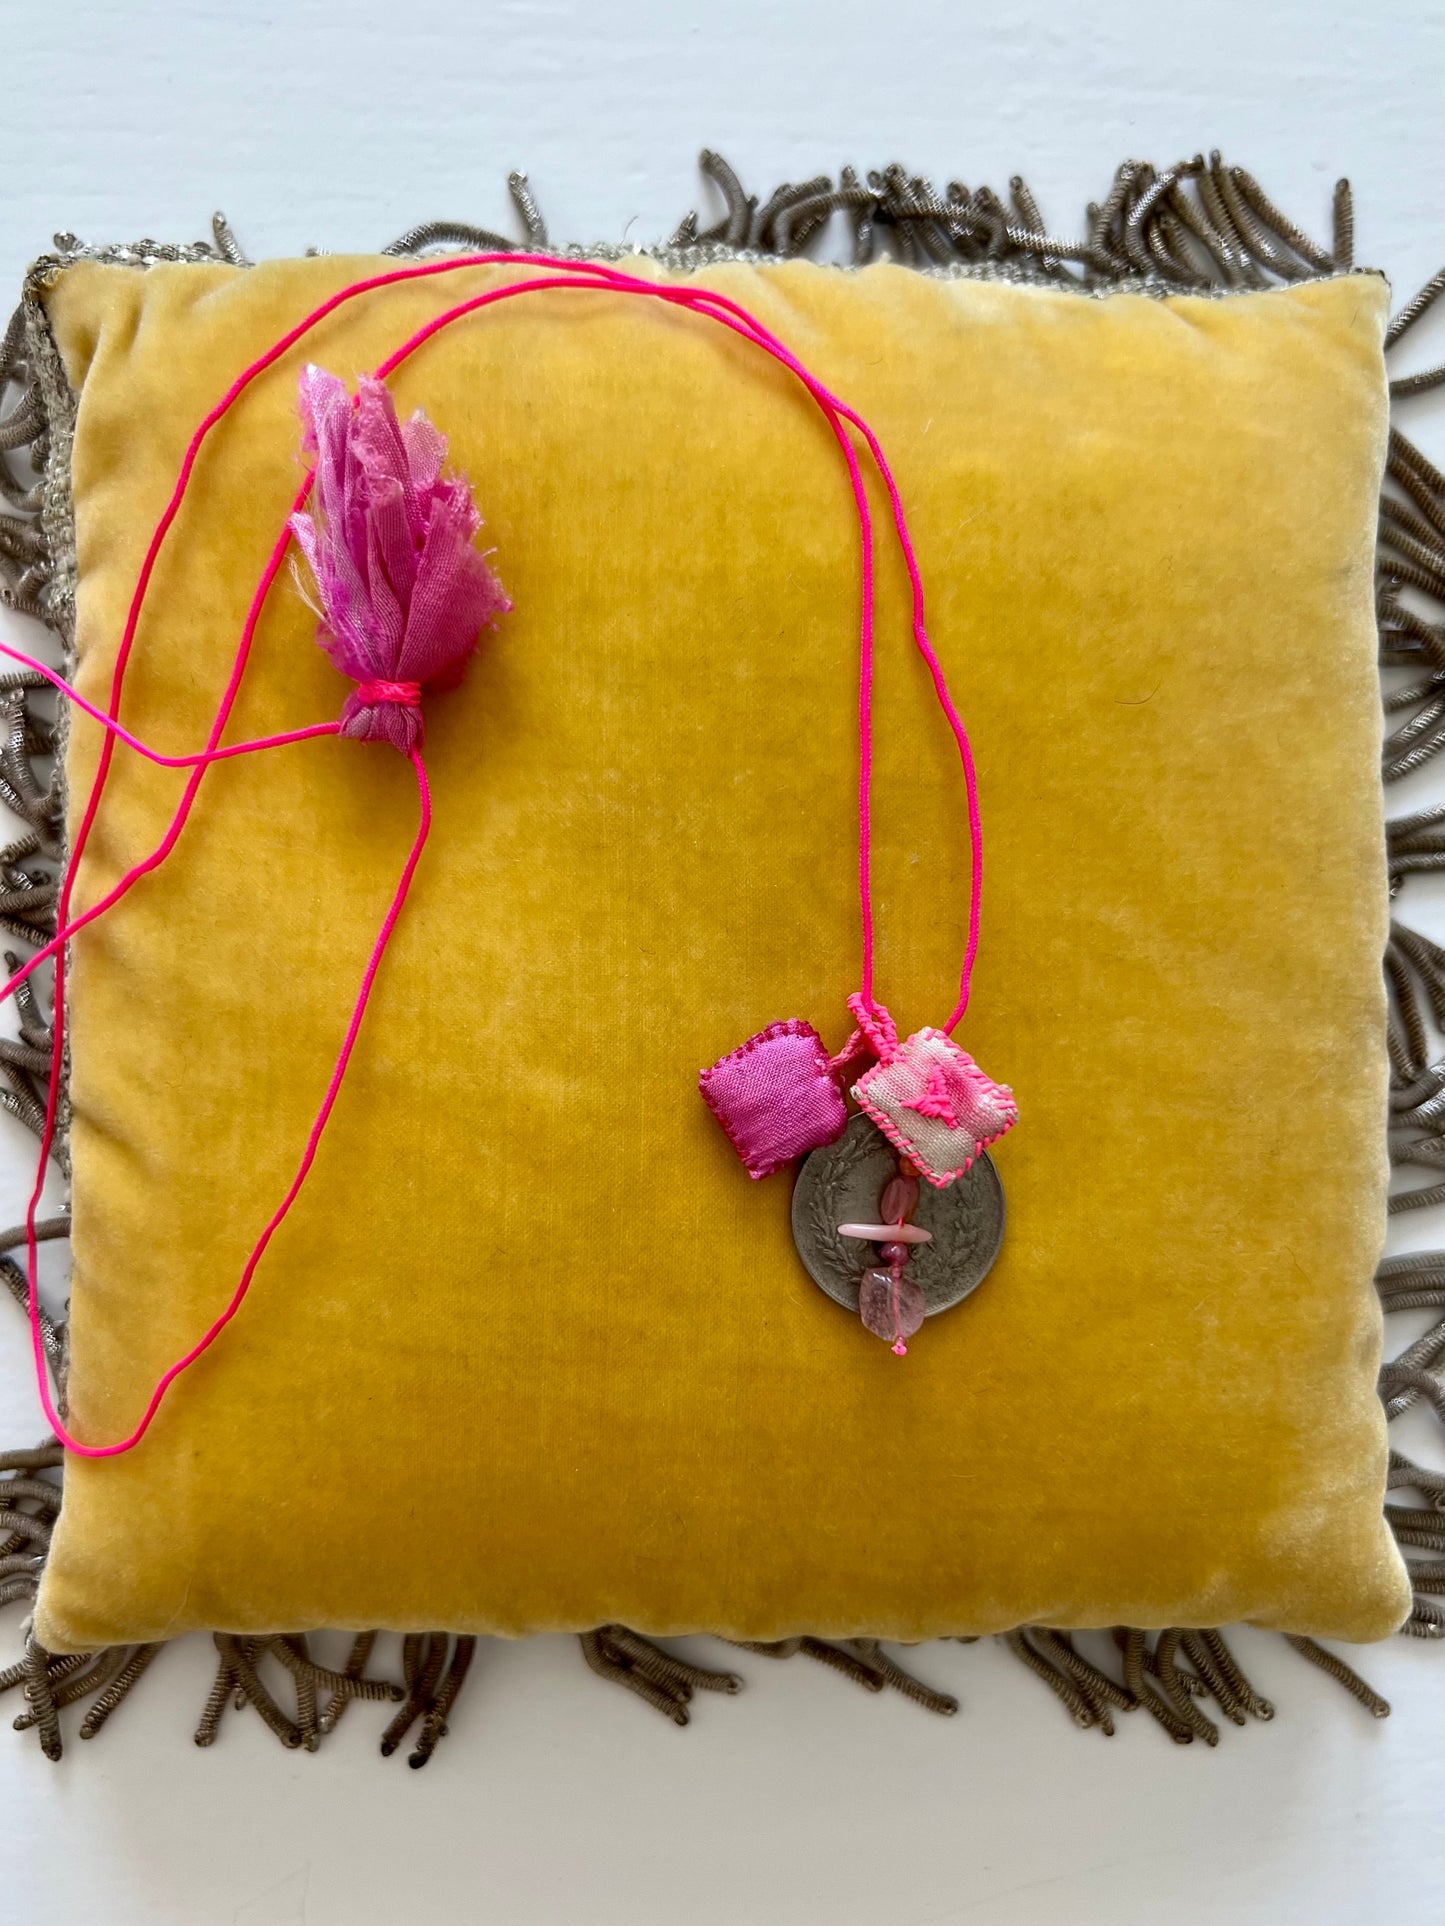 Necklace - Long Fluo Pink